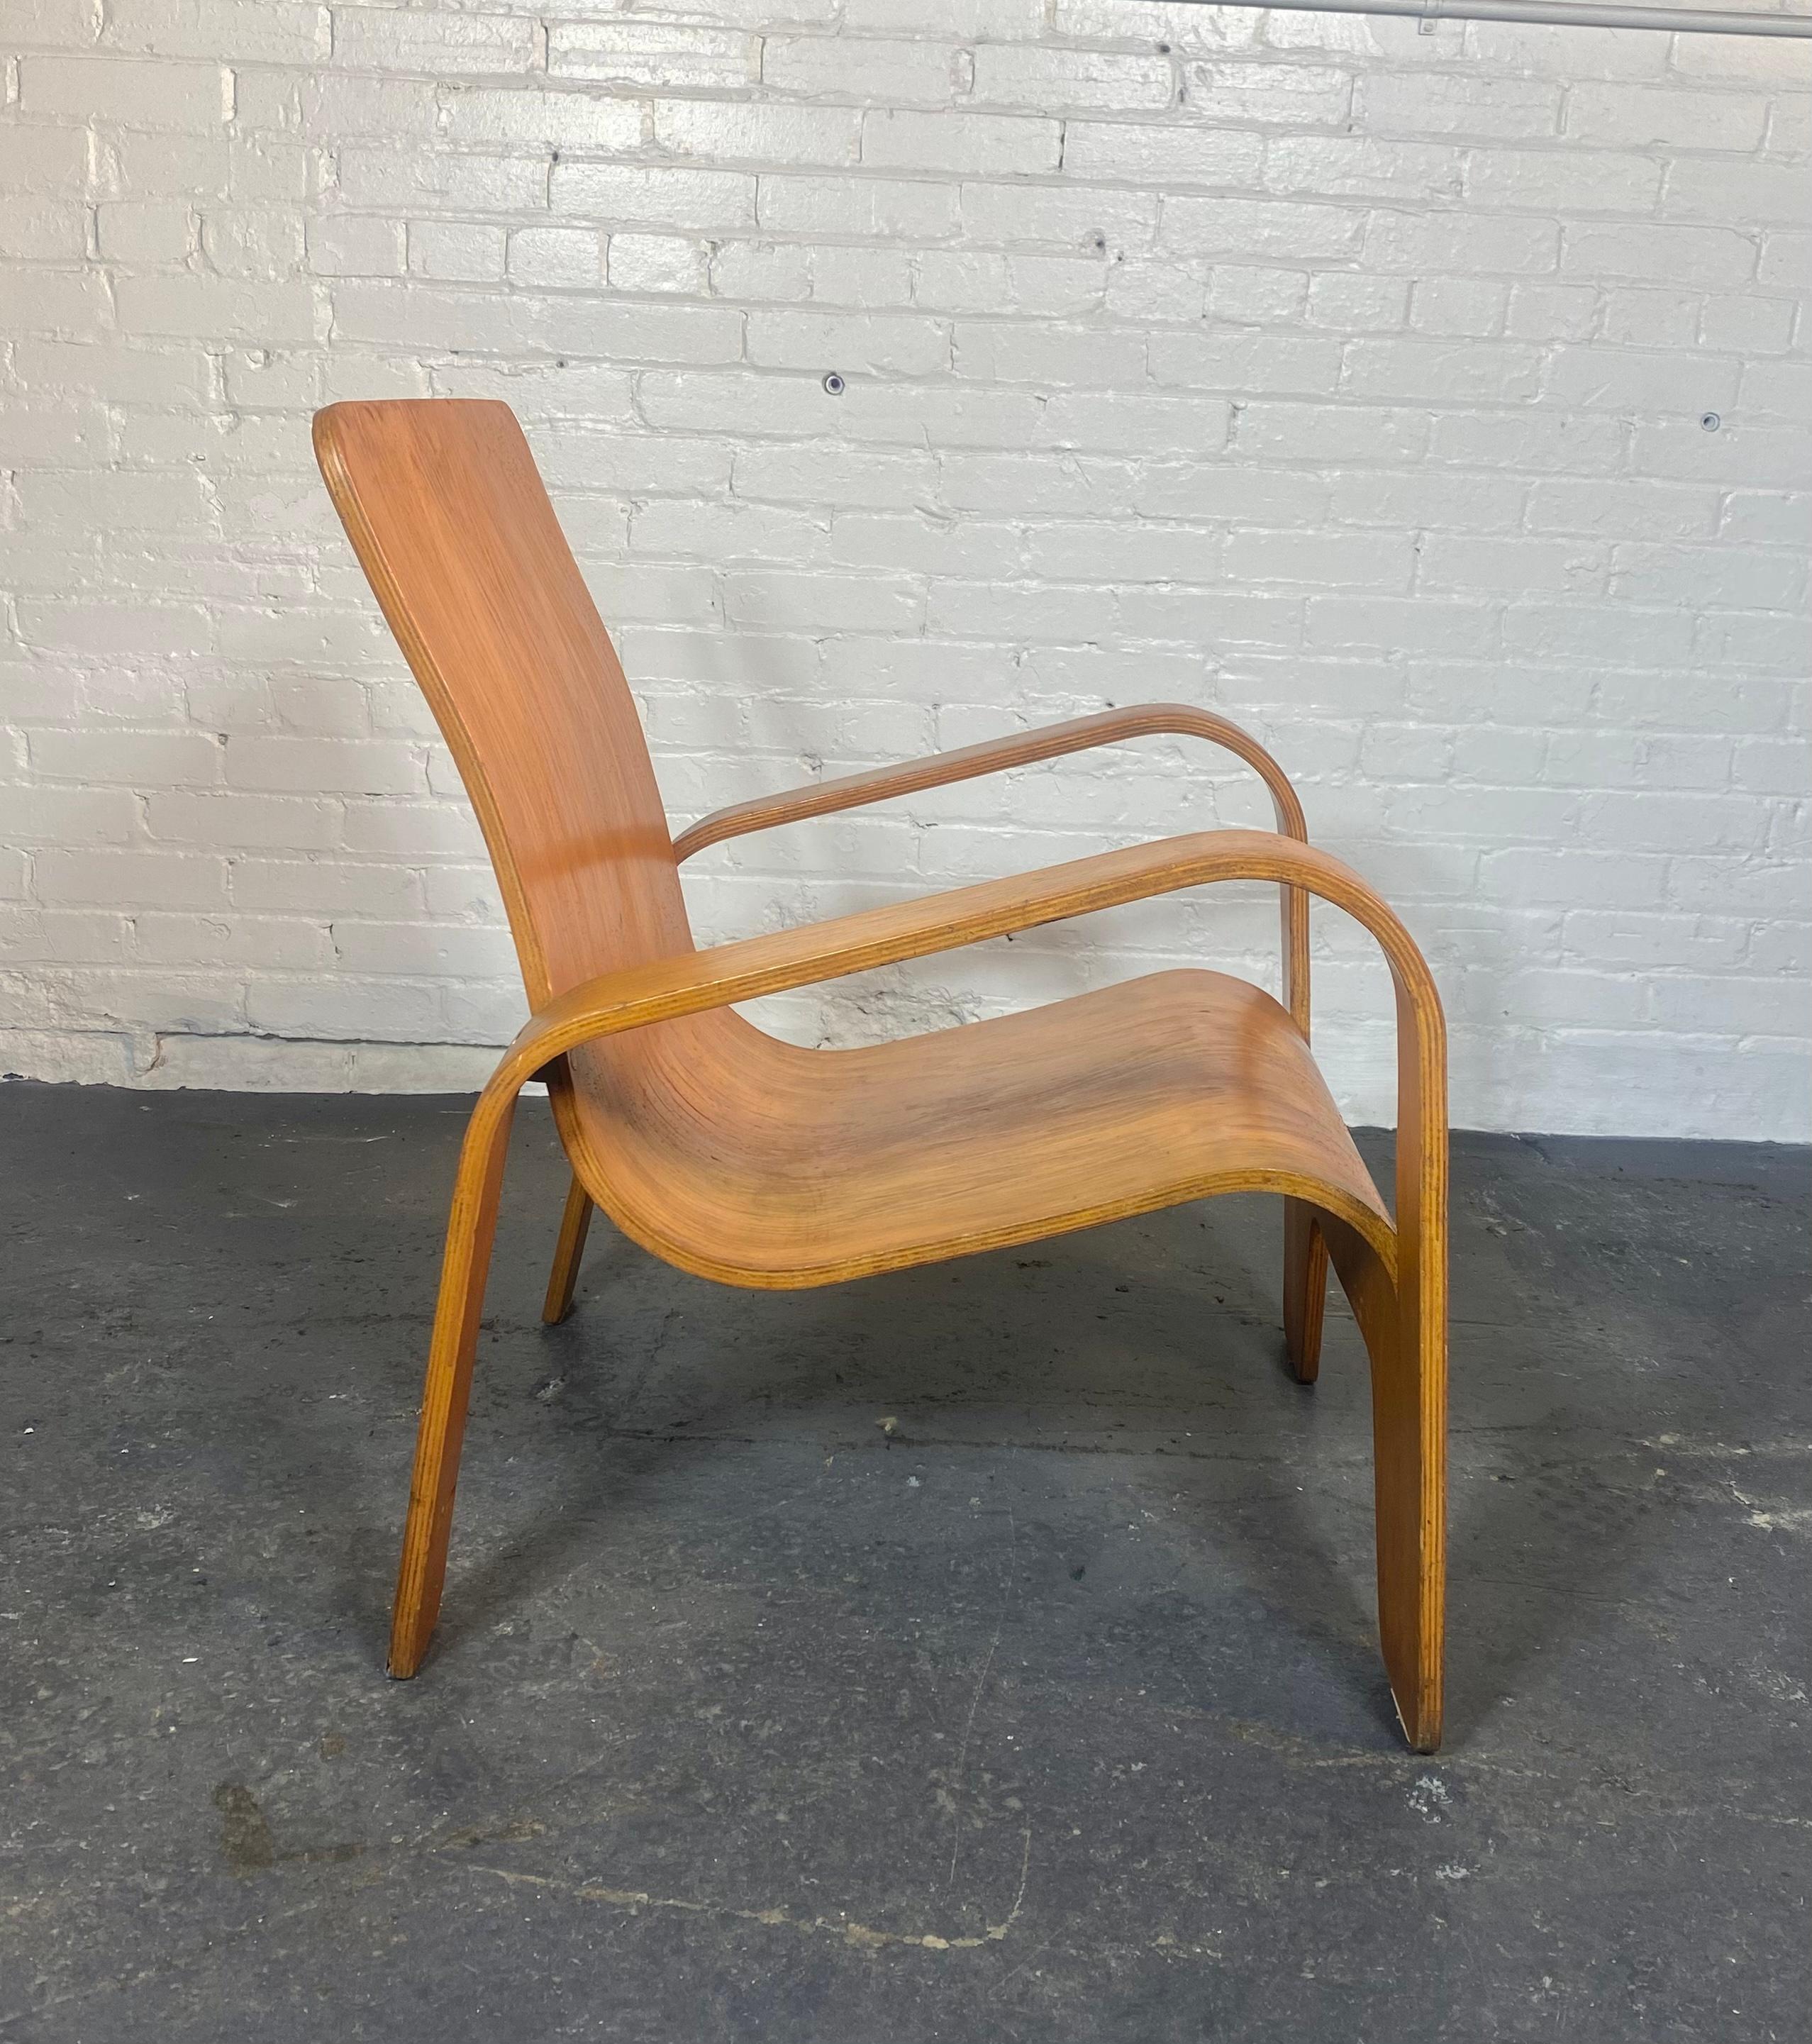 Brass LaWo1 Molded Plywood Lounge Chair by Han Pieck for Lawo Ommen/ Netherlands 1945 For Sale